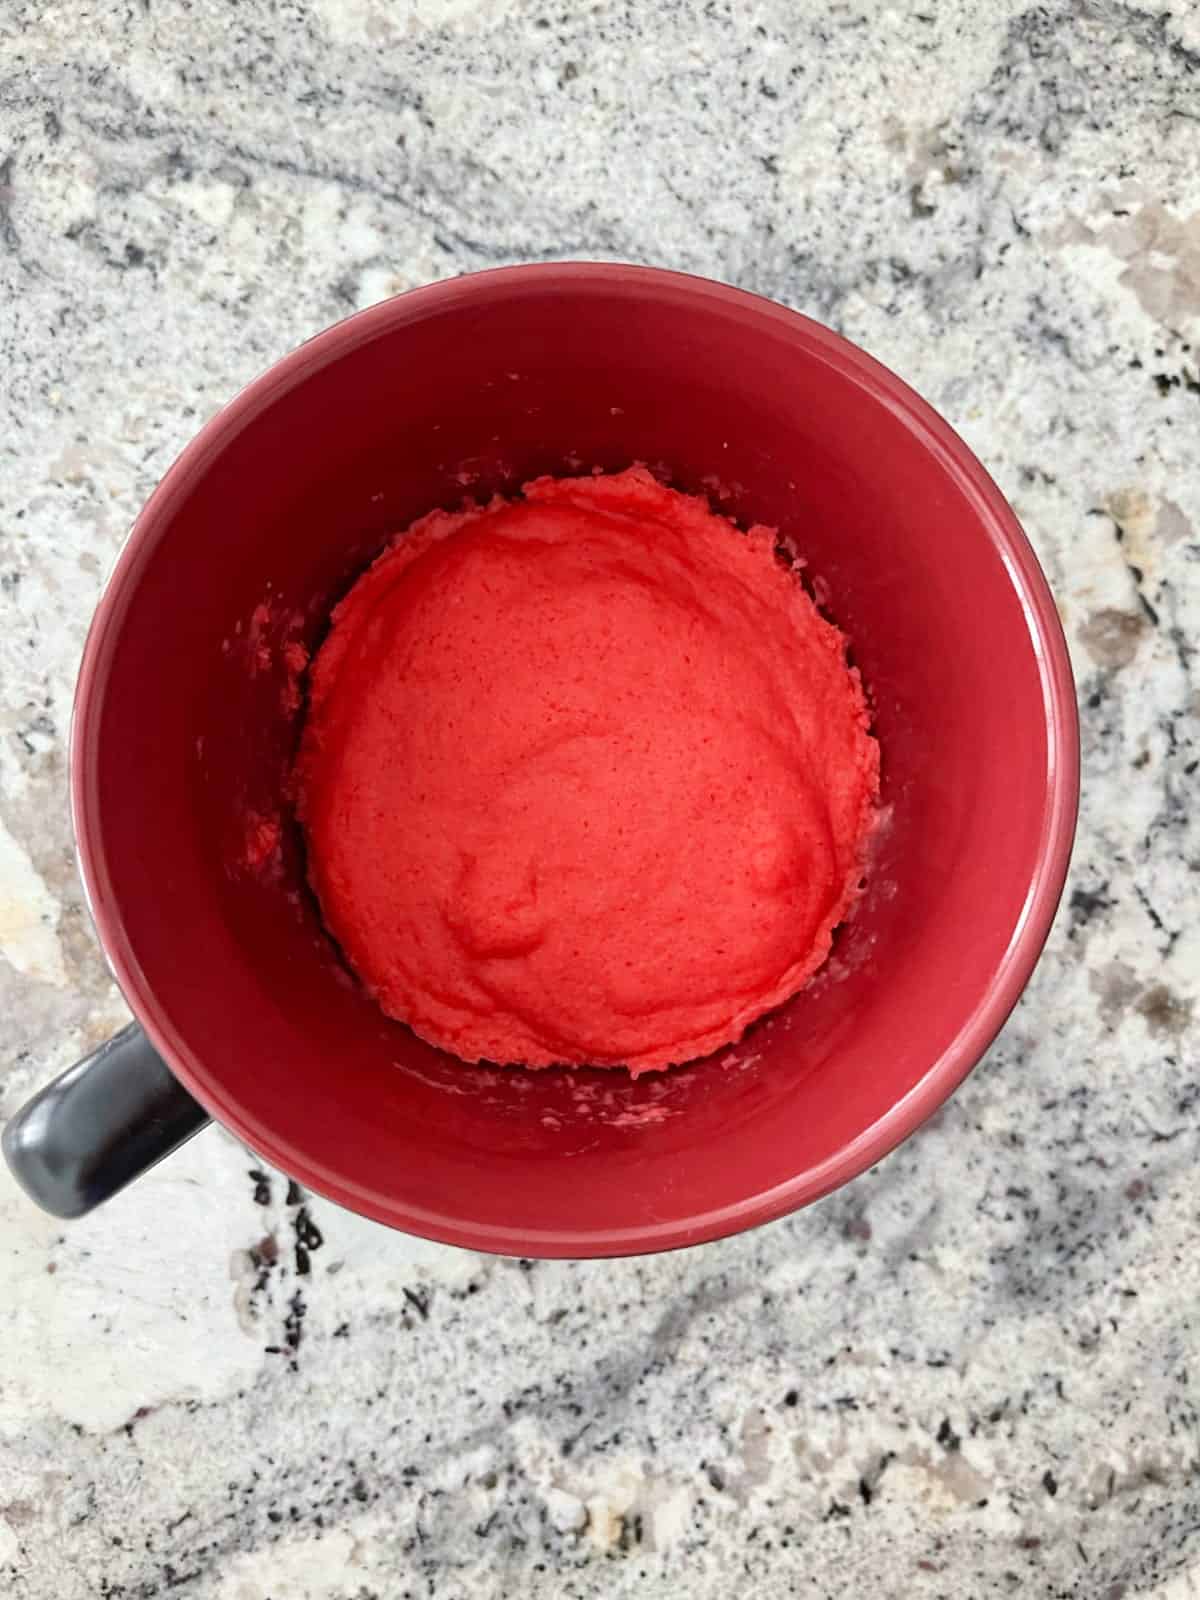 Fresh cooked raspberry Jell-o microwave cake in red mug on granite counter.